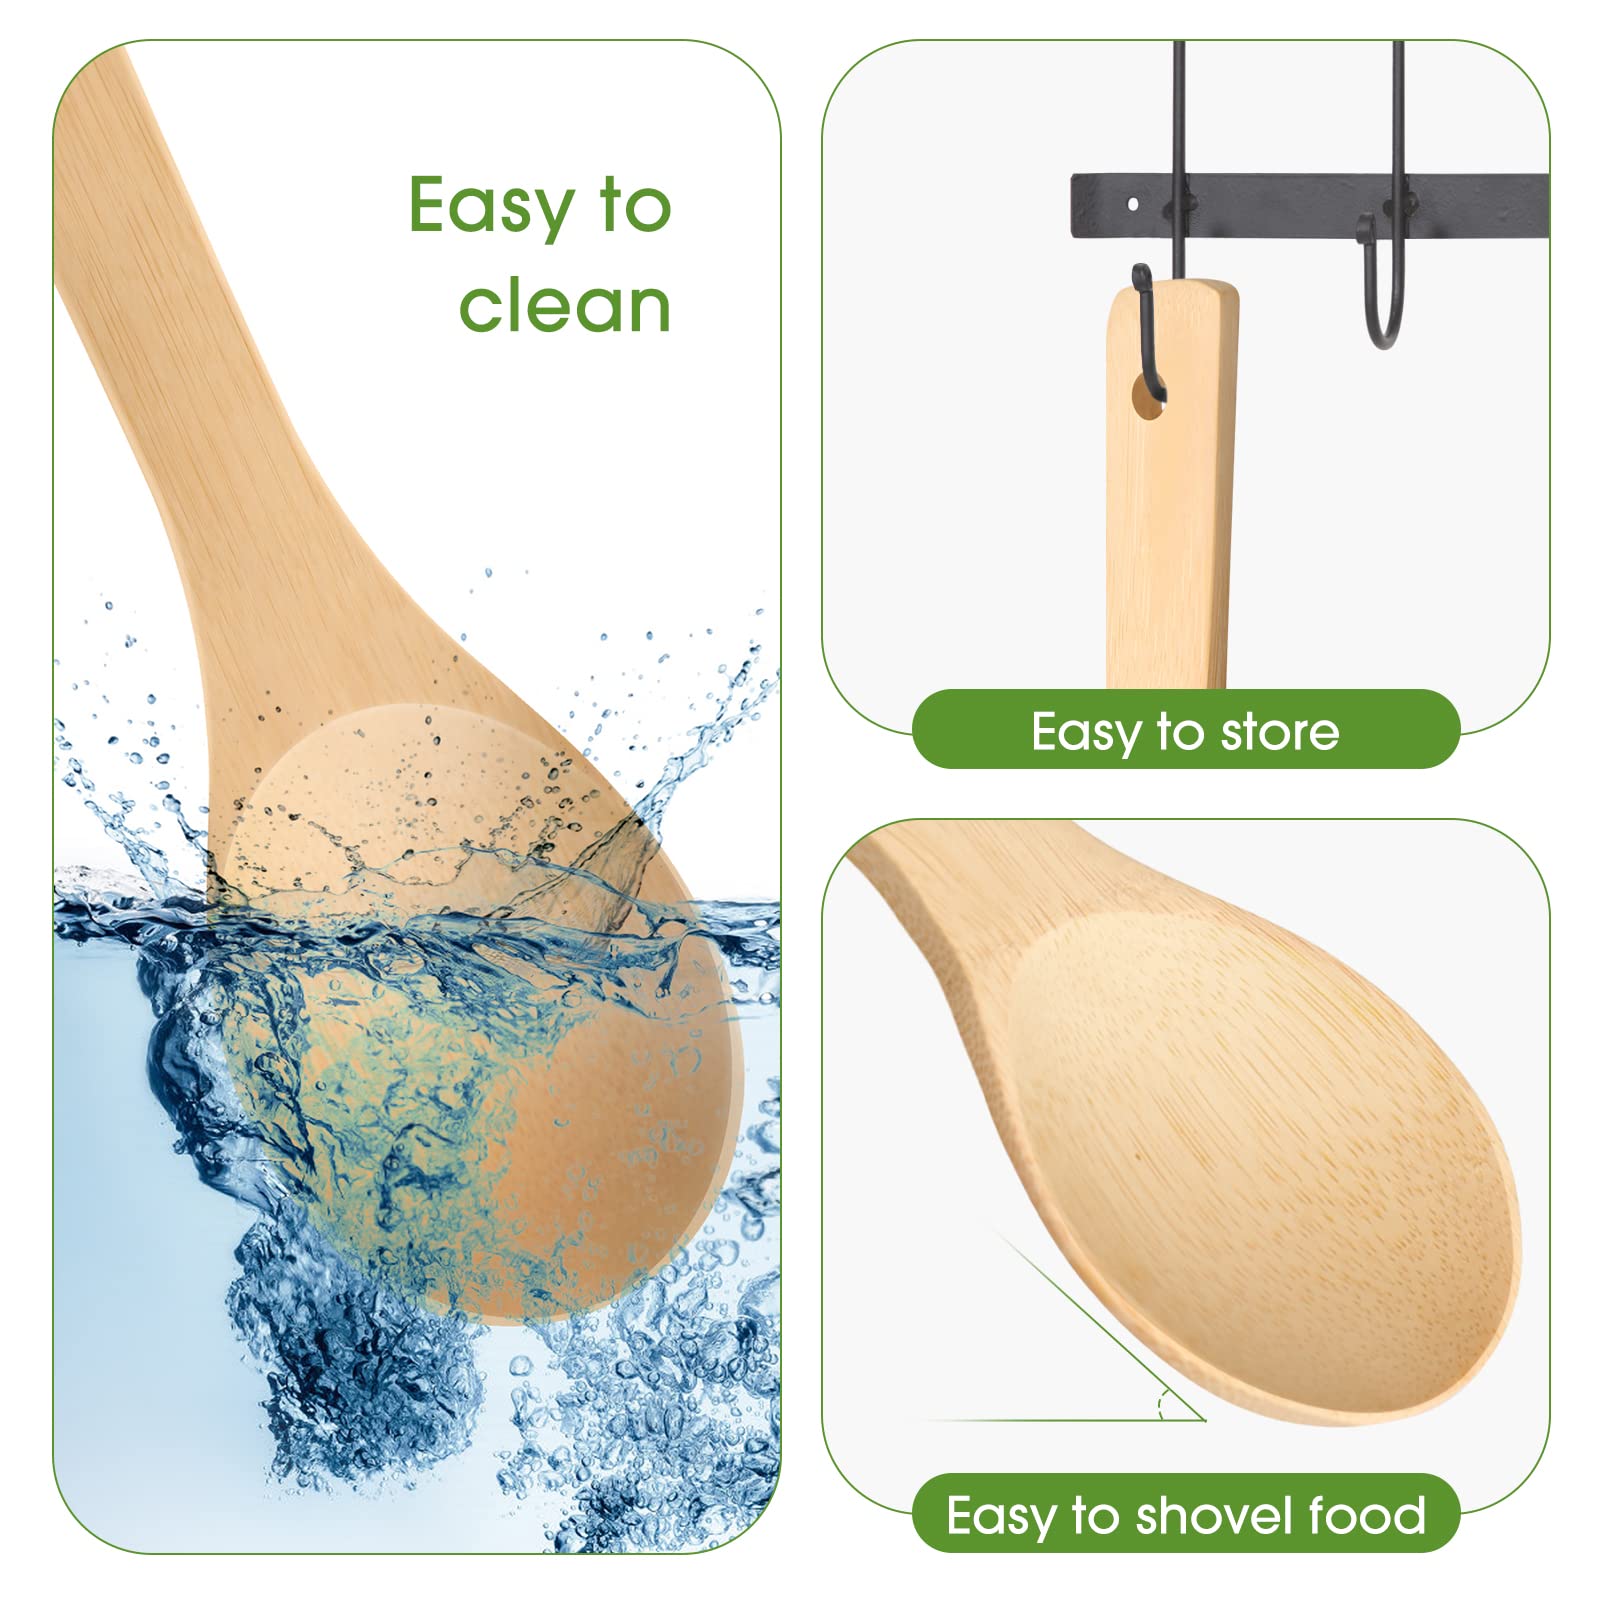 LorisArm Bamboo Rice paddle 2pcs Wooden Spoons for Serving Utensil, Wood rice scooper spoon Kitchen Utensil Set.